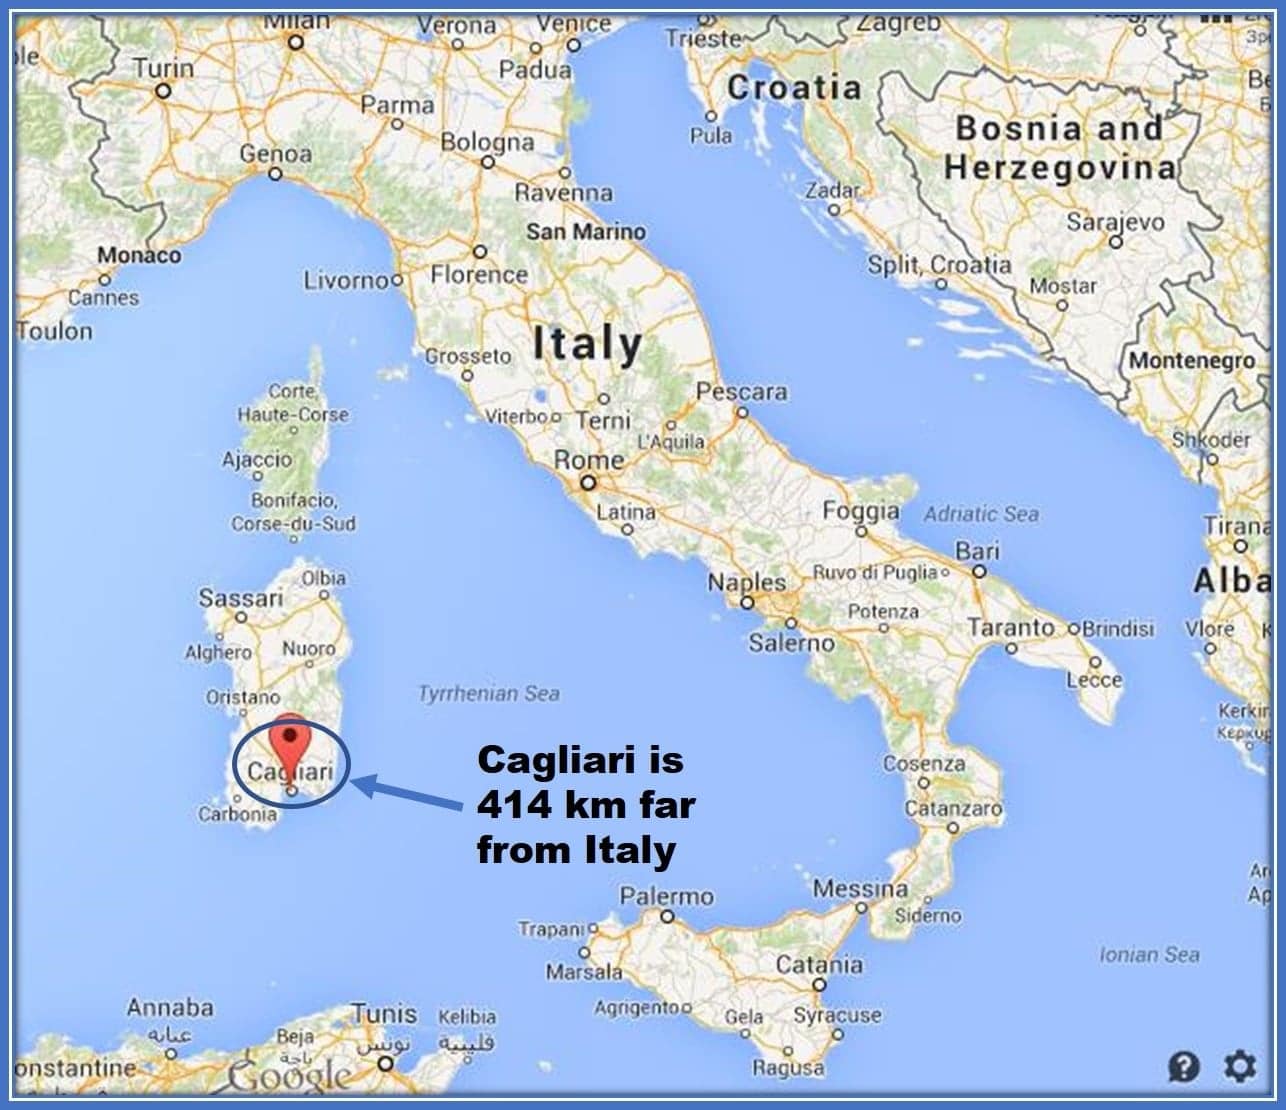 Their origin is traced back to the capital city of Cagliari. It's an Island which is about 414km far from Italy.